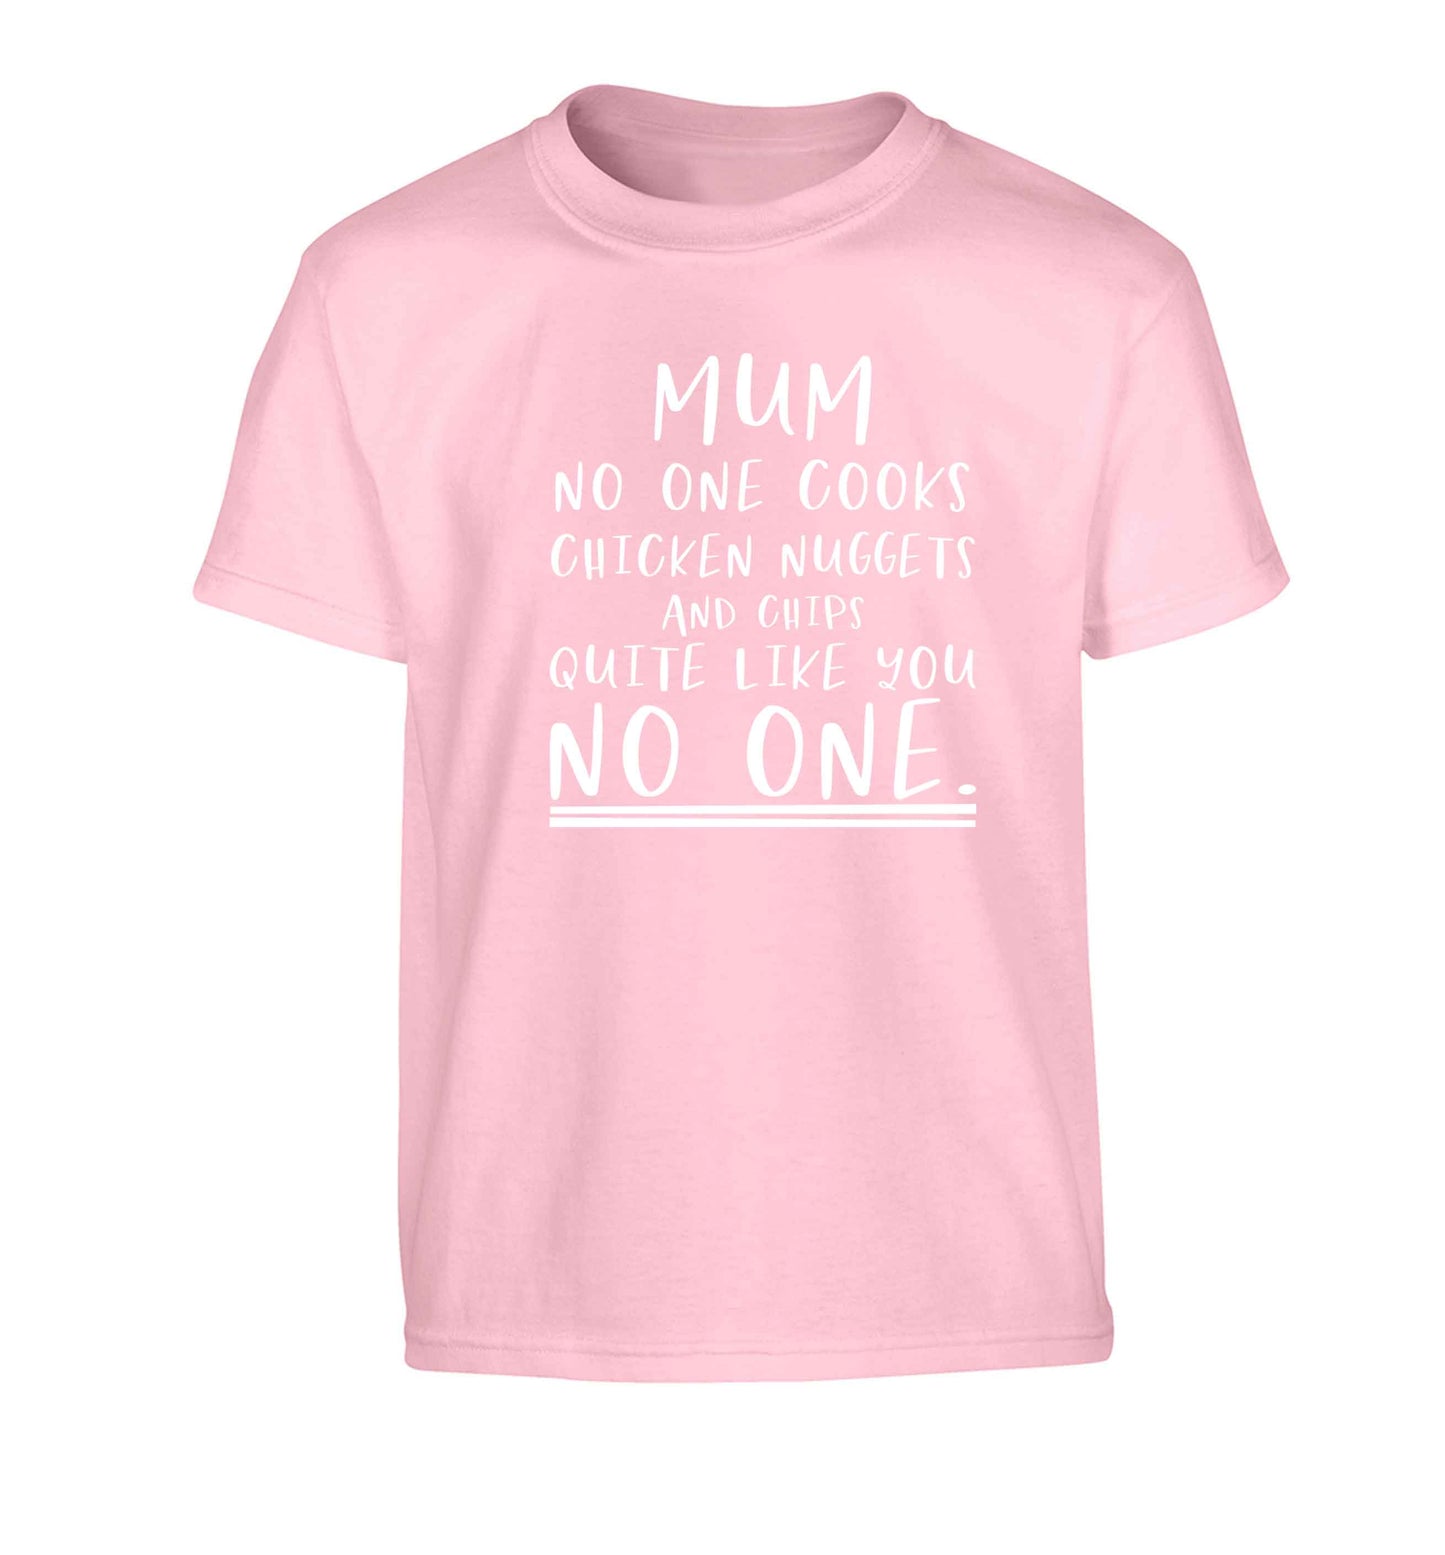 Super funny sassy gift for mother's day or birthday!  Mum no one cooks chicken nuggets and chips like you no one Children's light pink Tshirt 12-13 Years